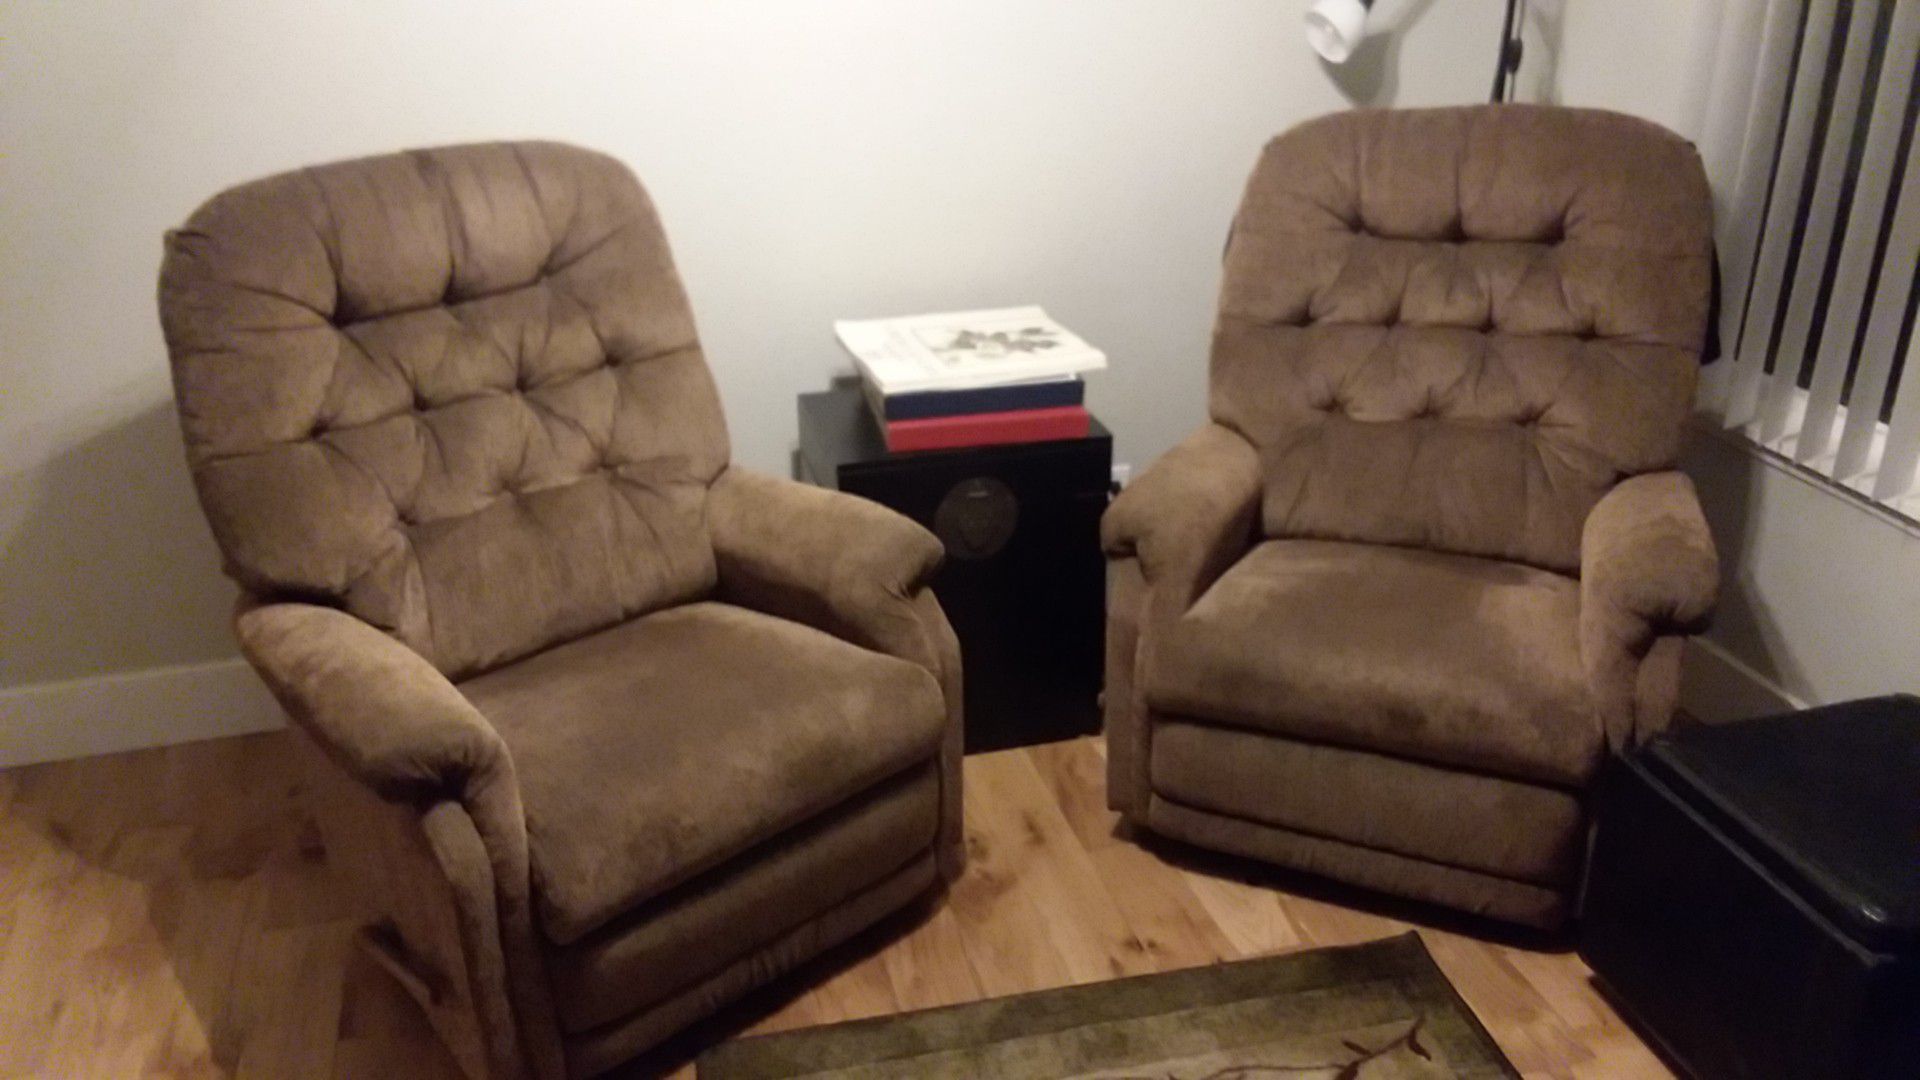 Pair of lazy boy recliners